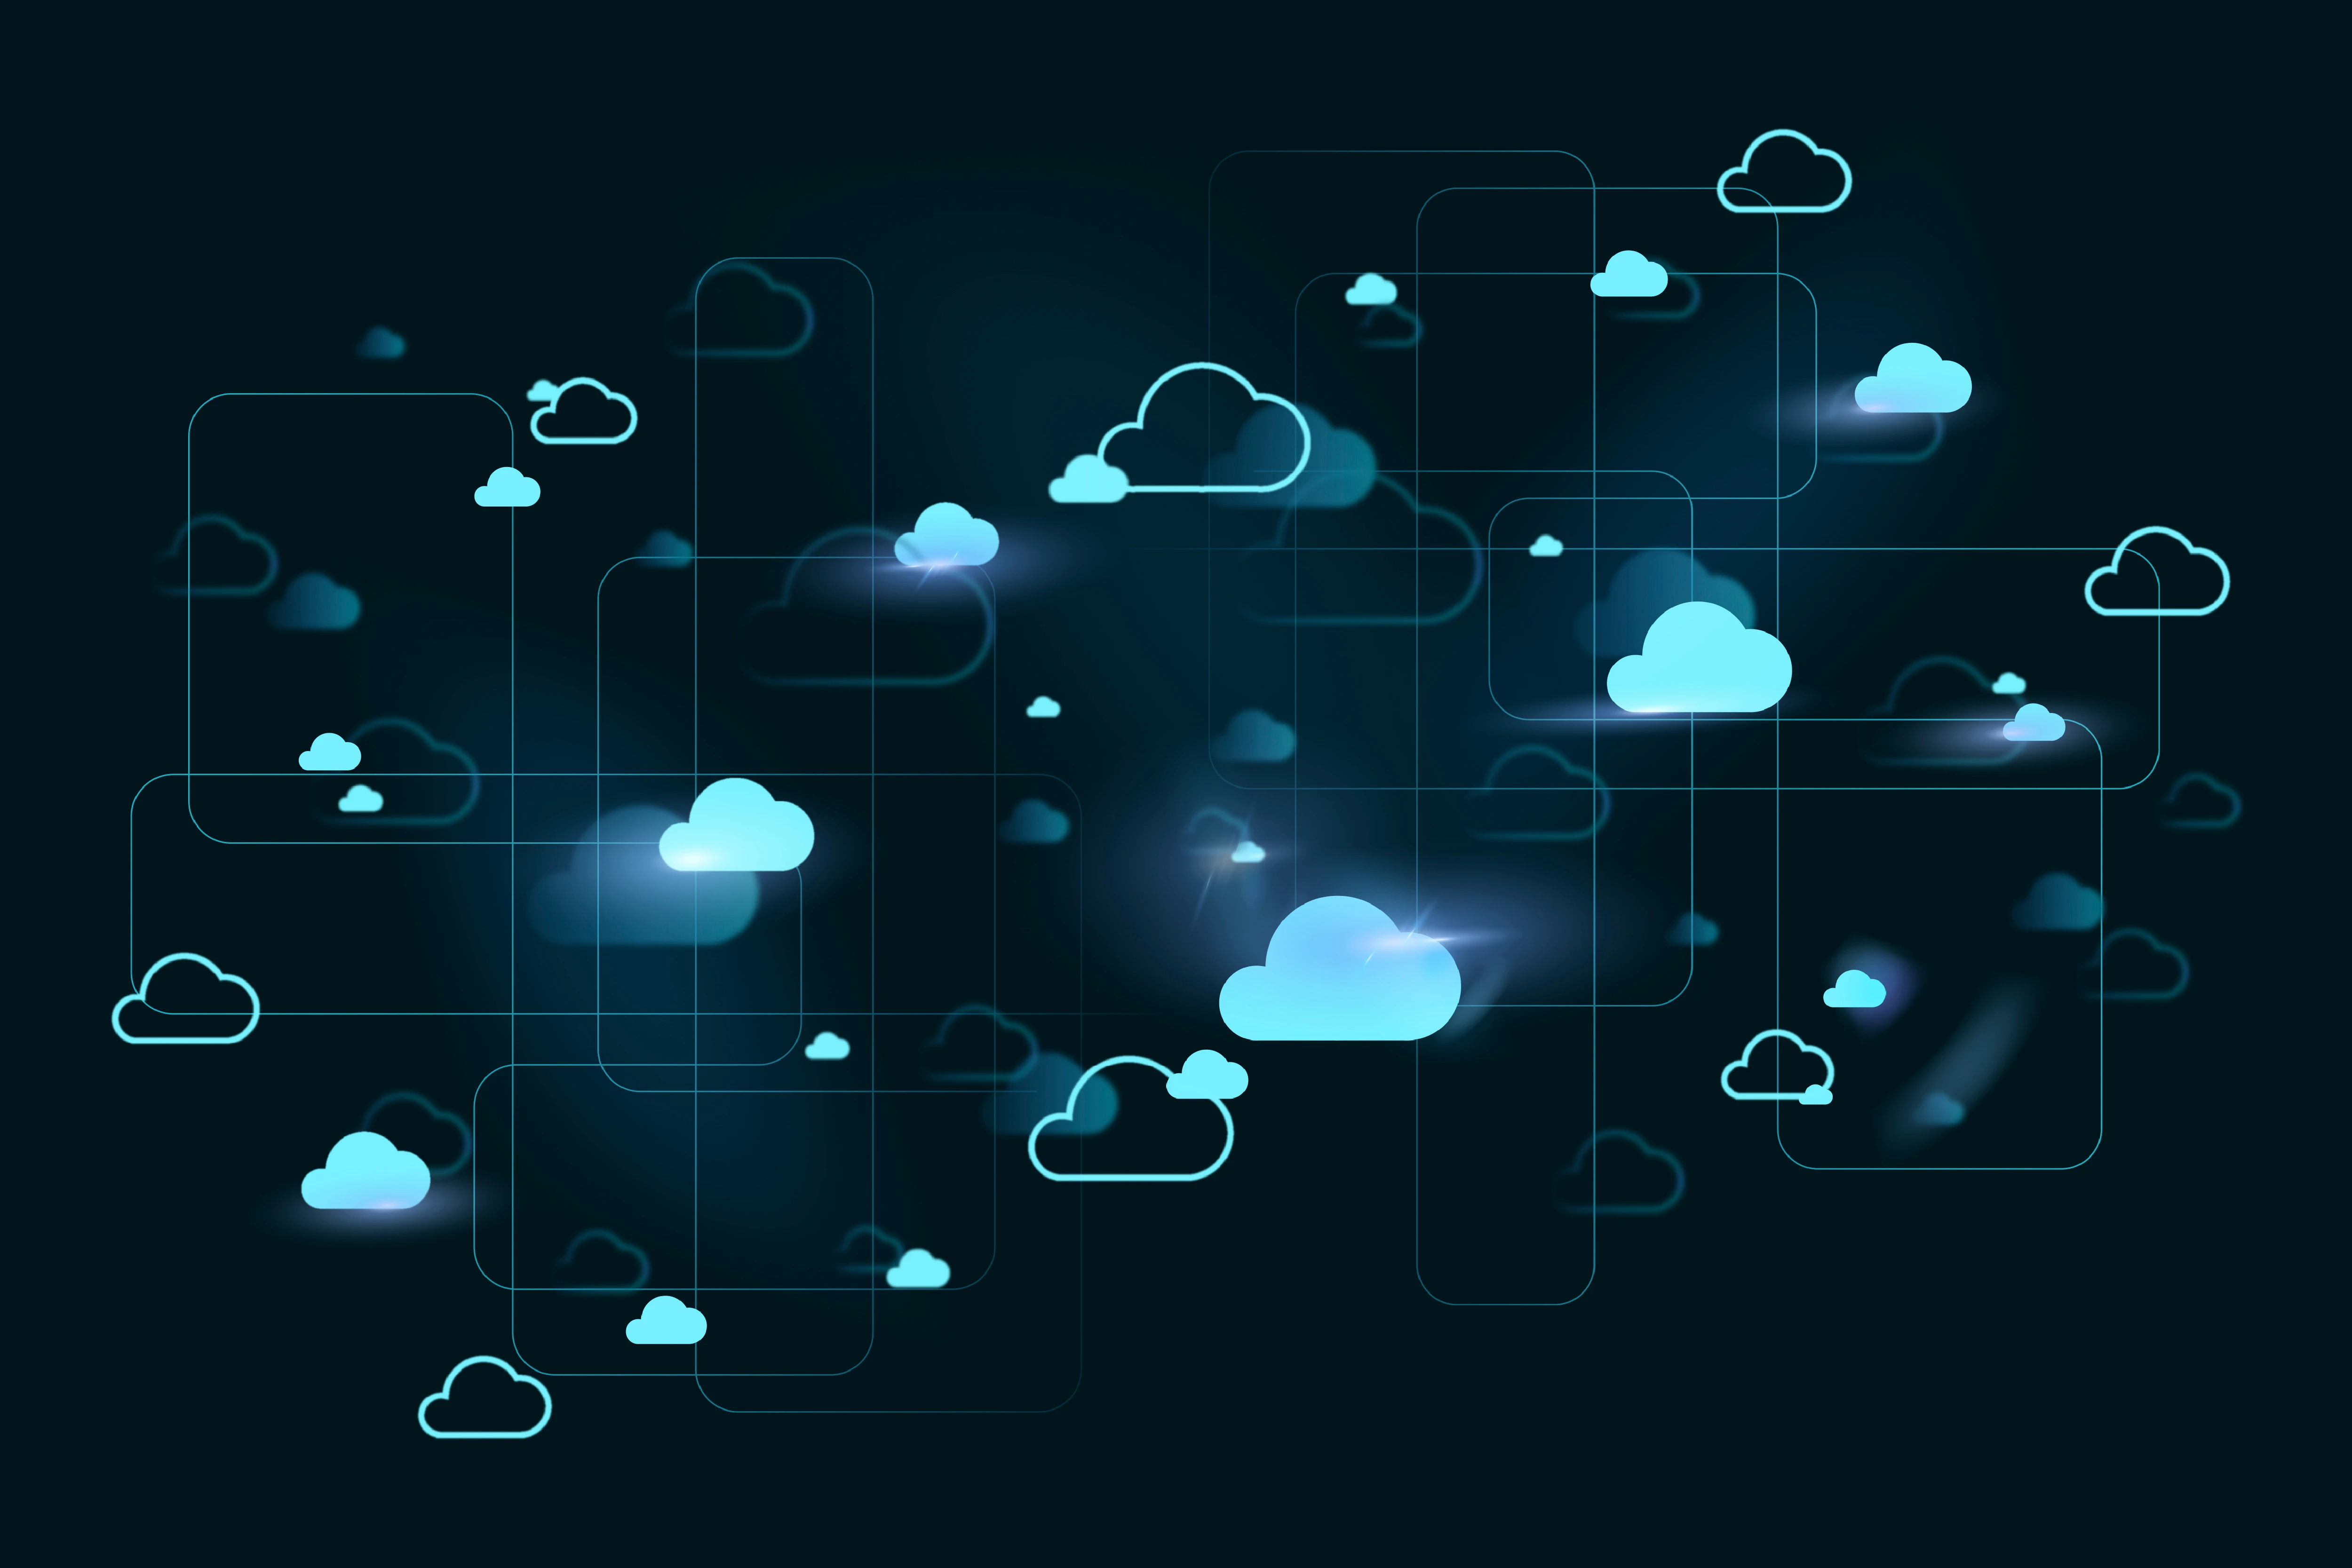 An image with multi cloud and hybrid cloud representation.